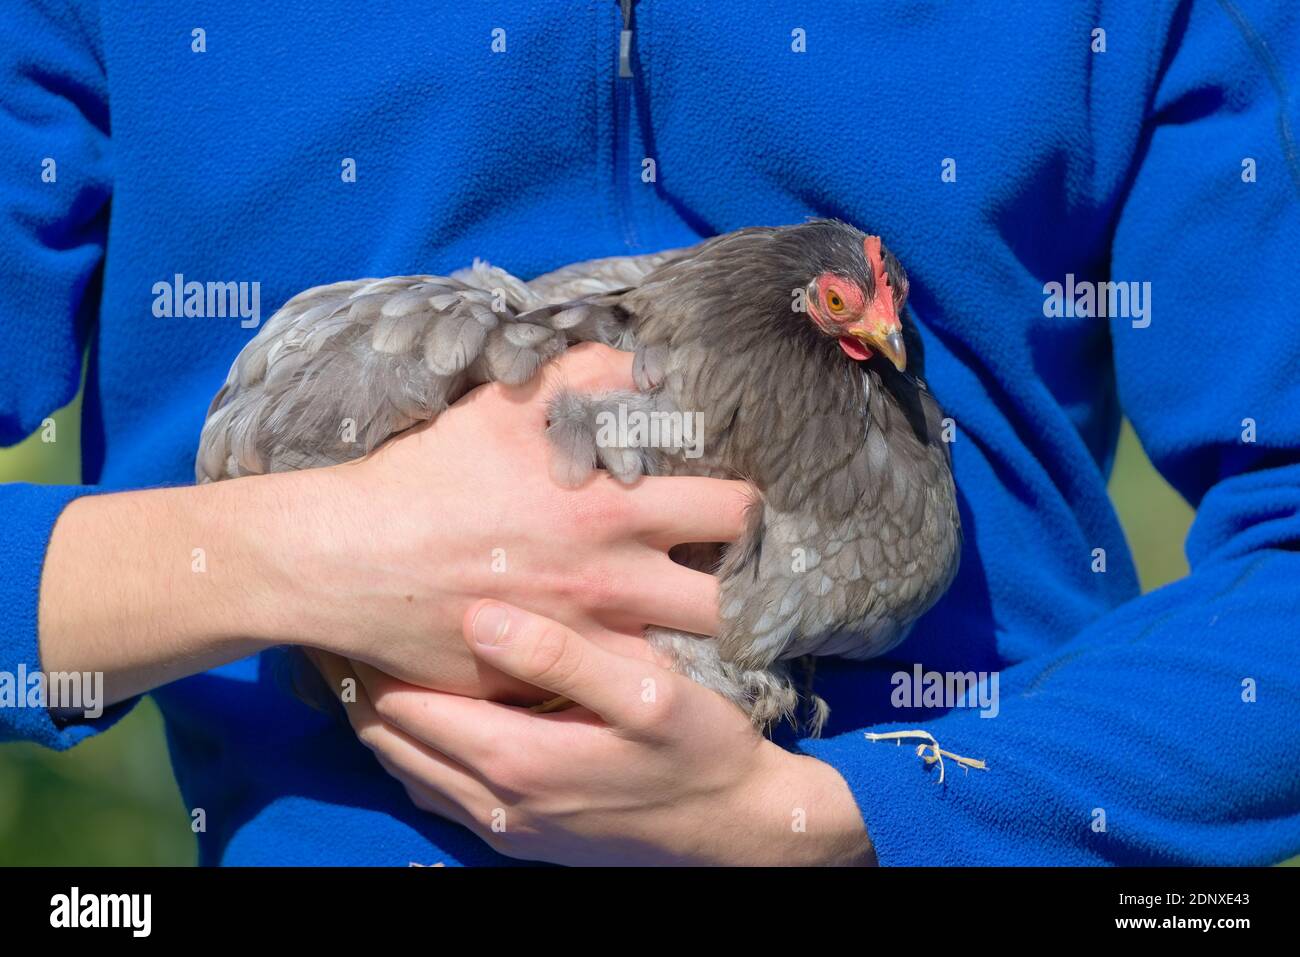 3 - Small pet hen chicken nestles into the vibrant mid blue jumper of her owner. Piece of straw on sleeve, and young hands and arms. Sunlit outdoors. Stock Photo